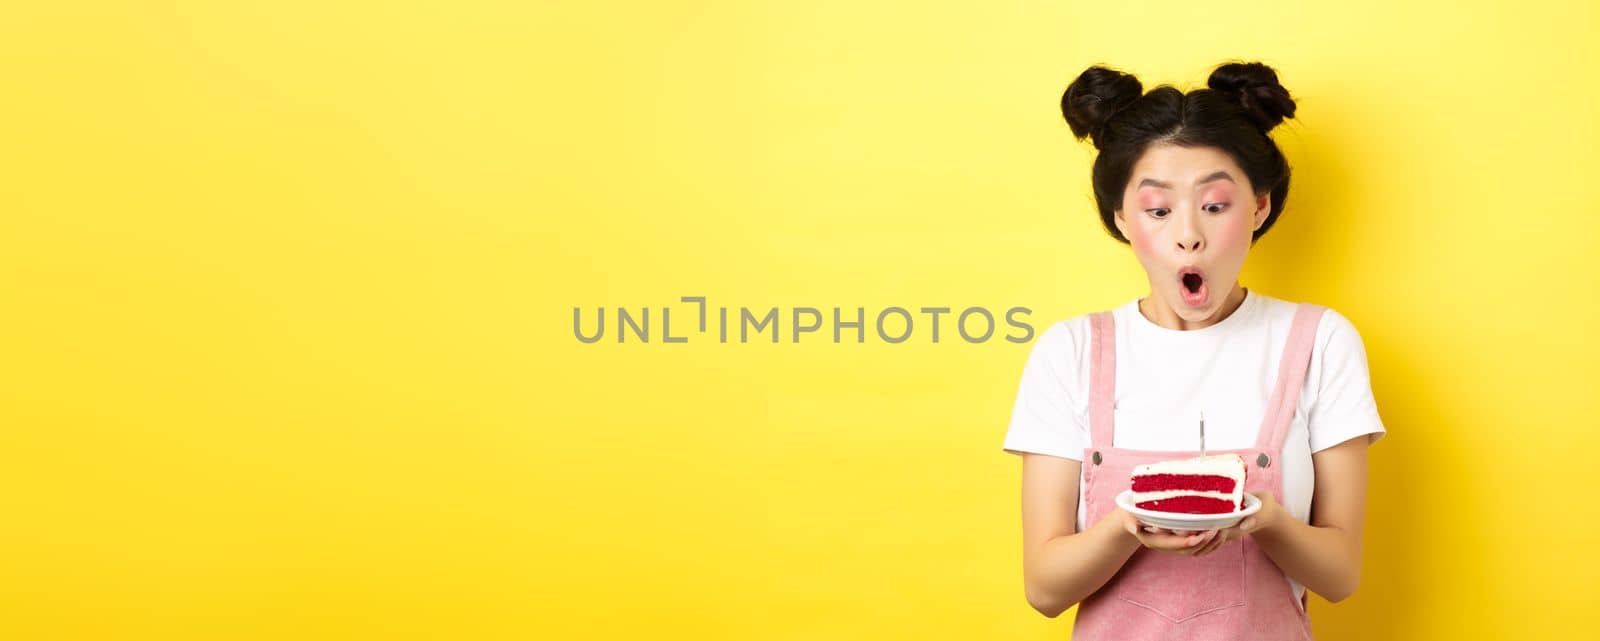 Cute asian birthday girl with bright makeup, blowing candle on cake, making wish, standing on yellow background.